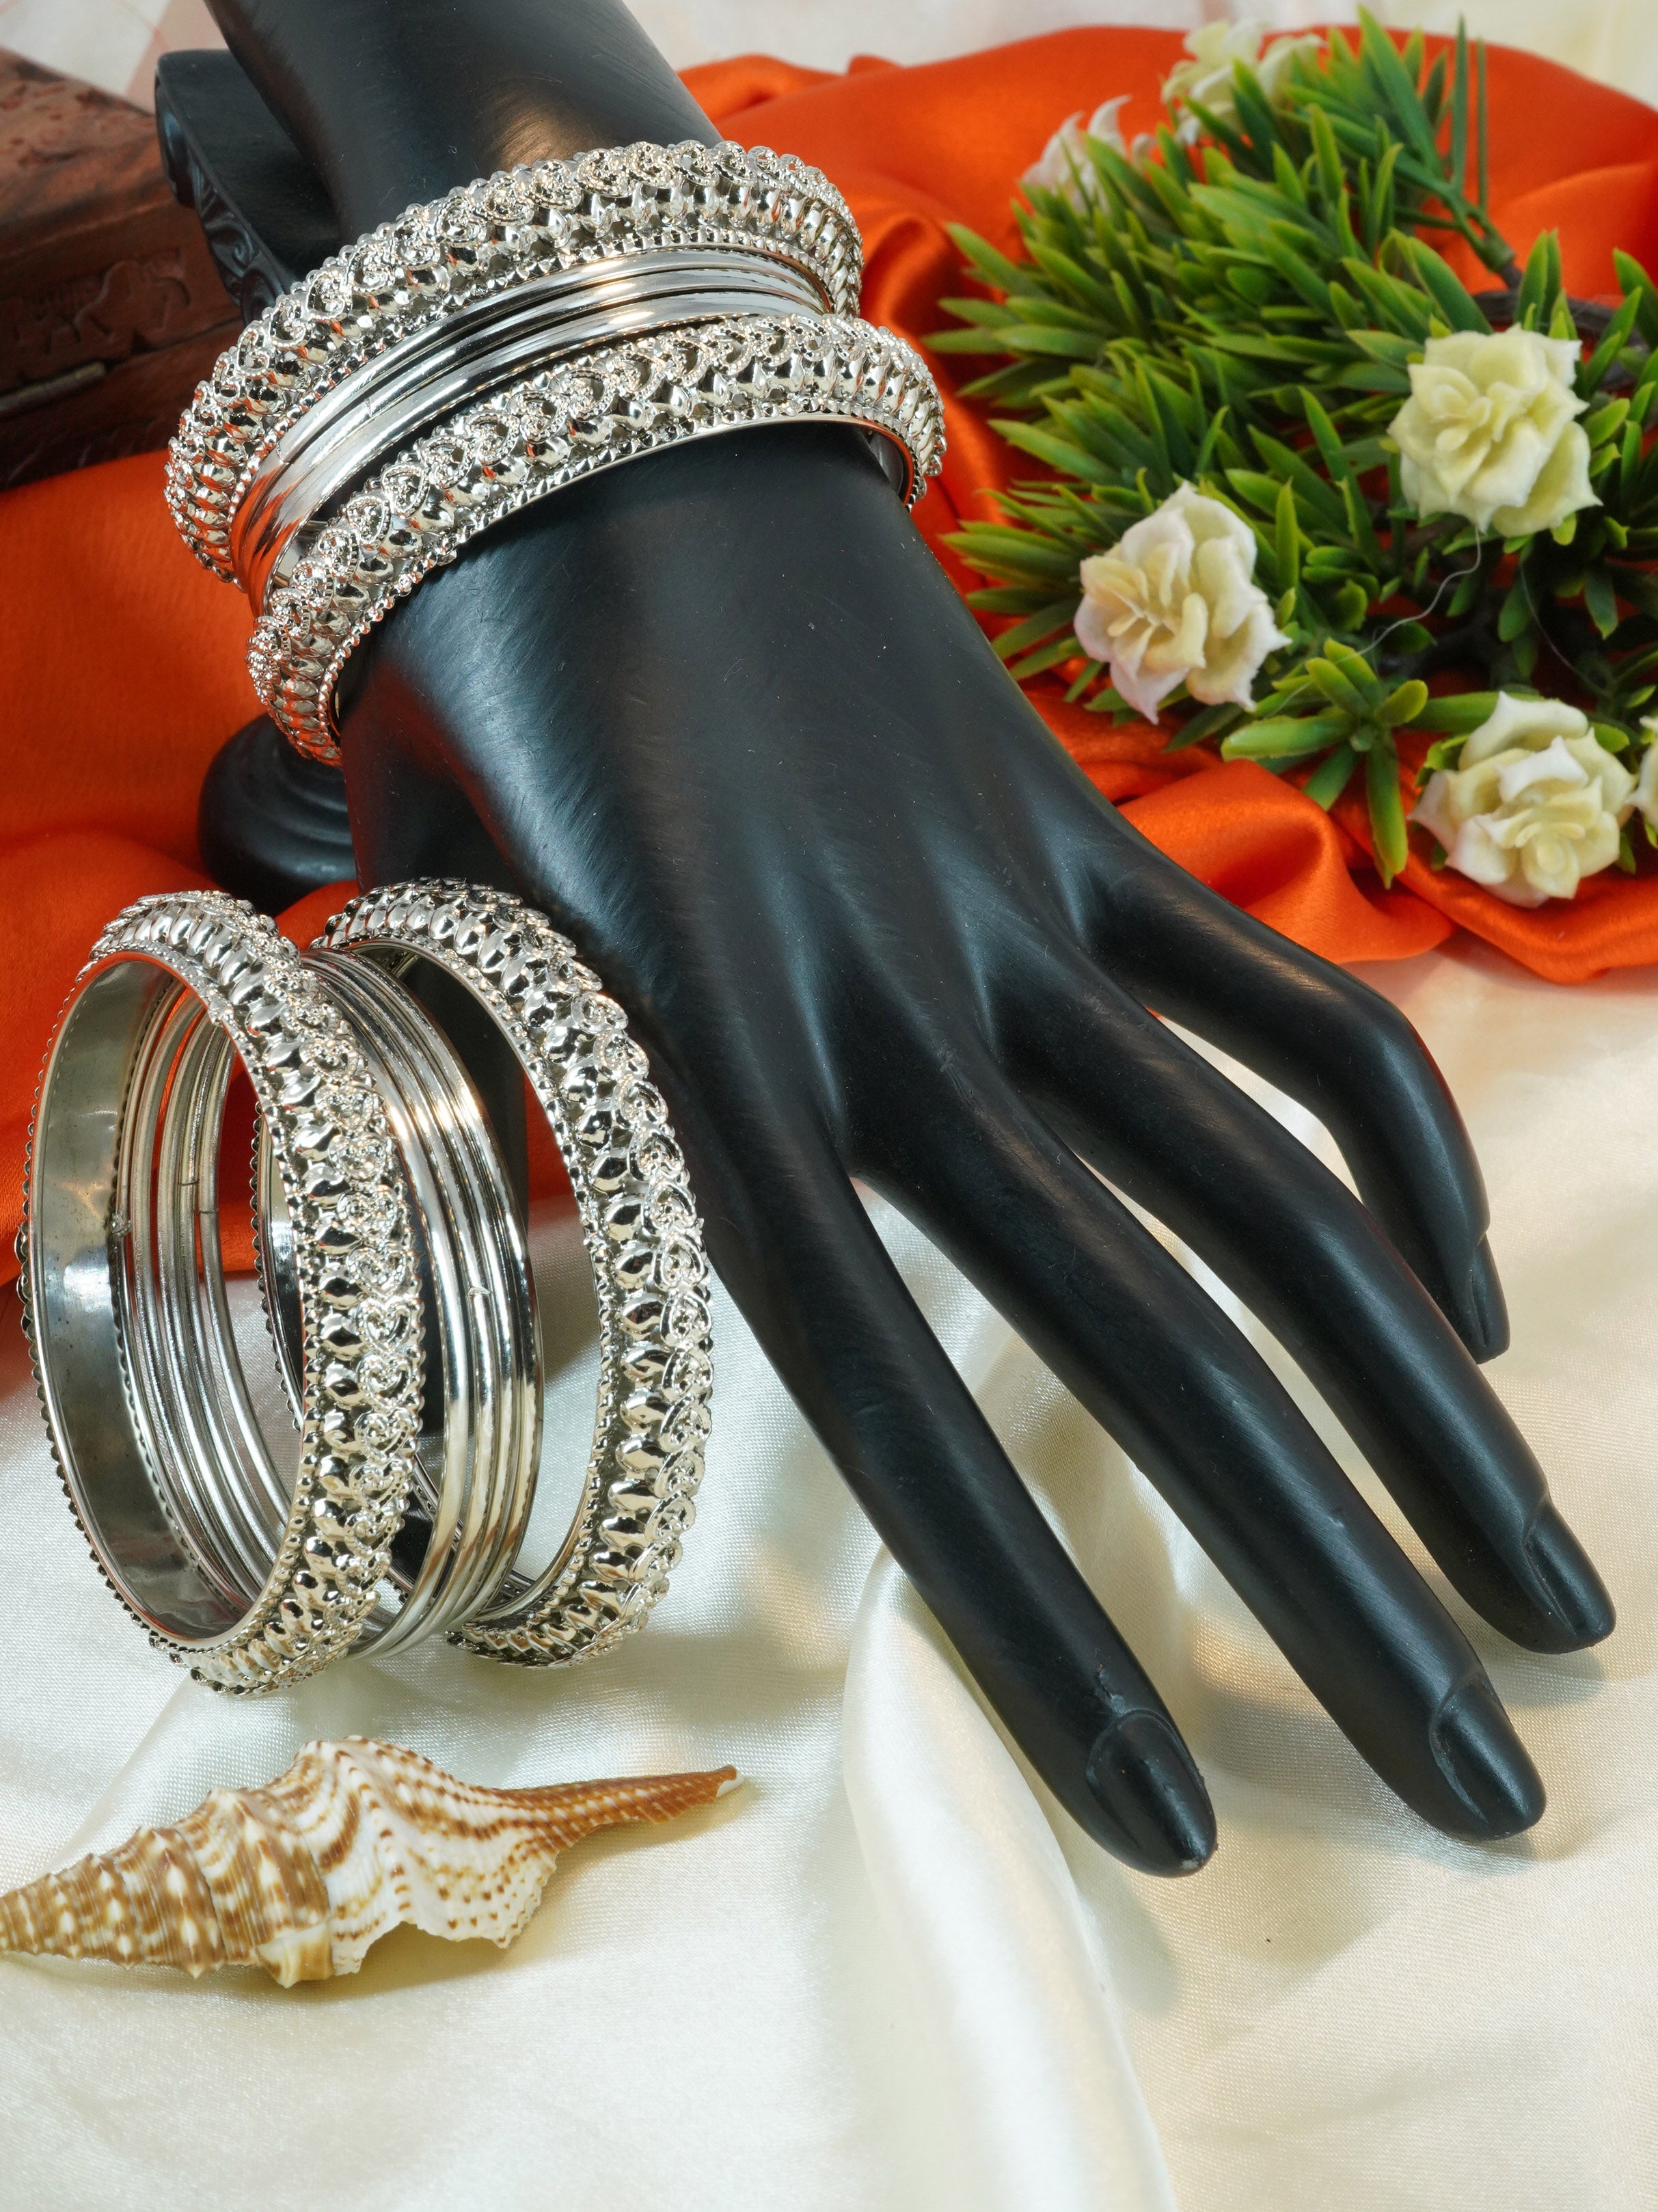 Fancy Silver Plated Bangles Set of 12 bangles 11455K